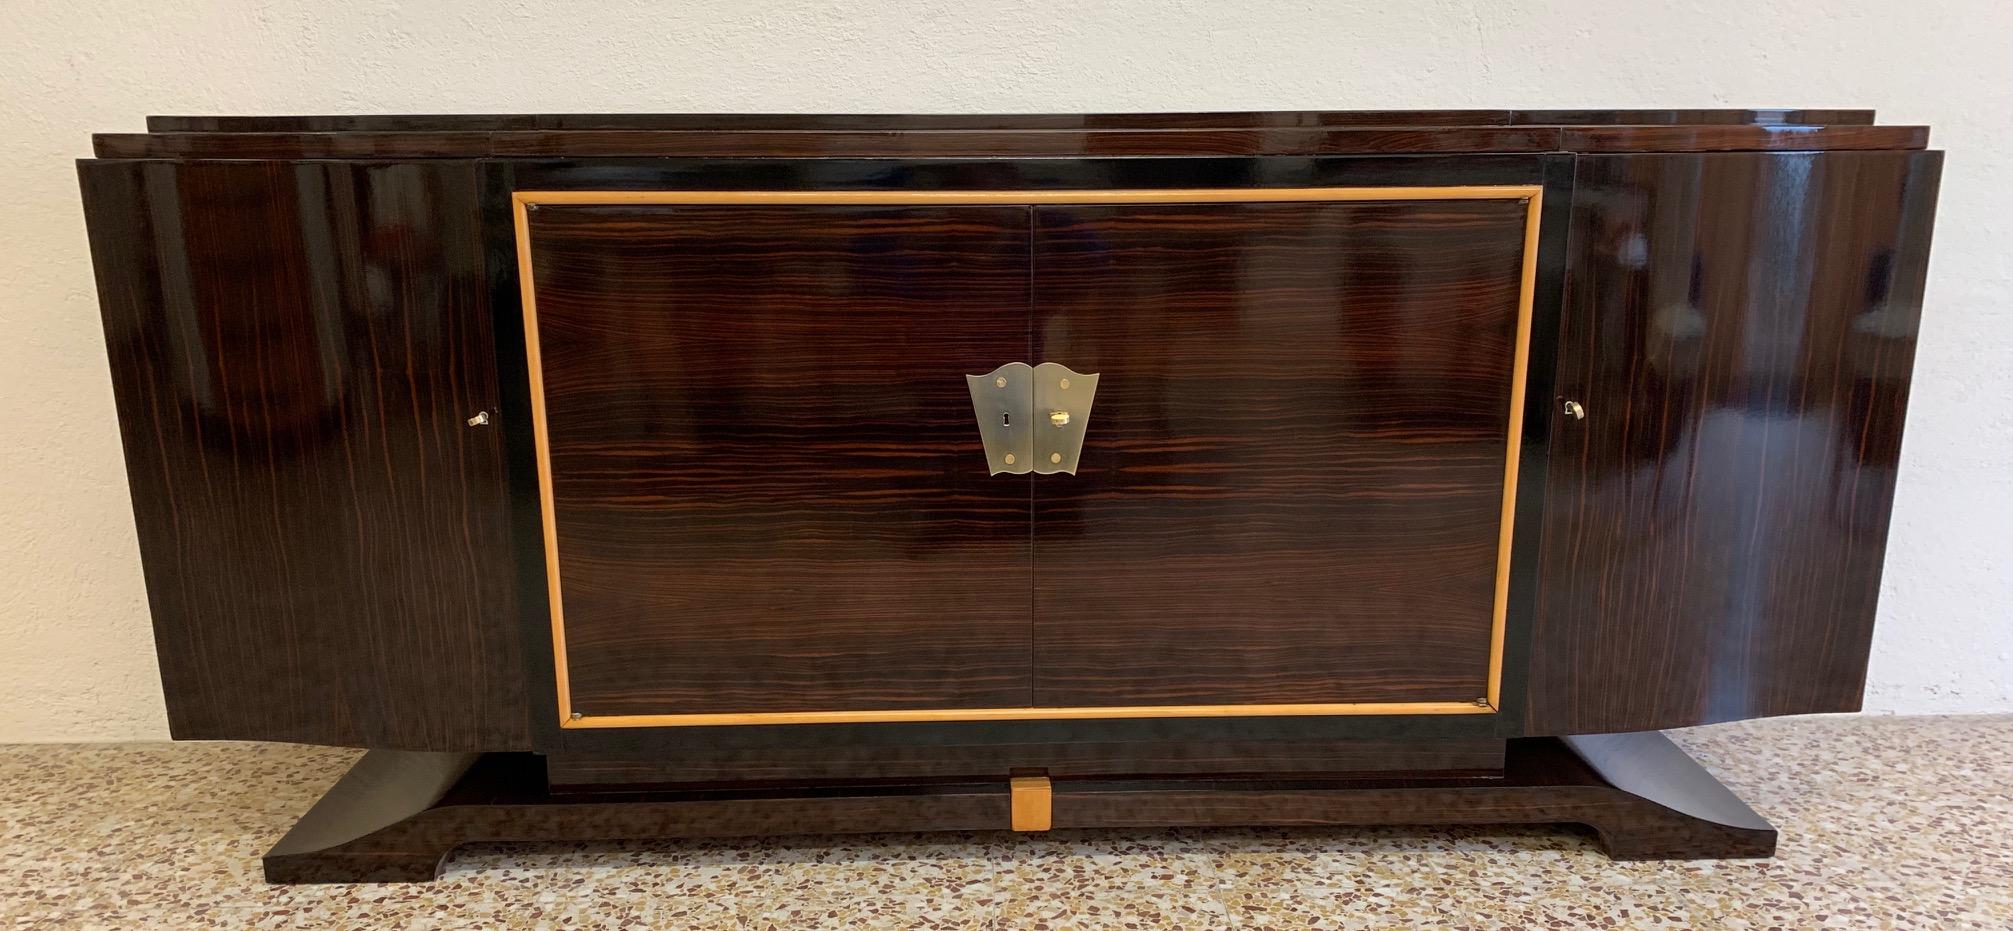 This precious sideboard was produced in France in the 1940s.
The sideboard is entirely covered in Macassar while the details are in solid maple and black lacquered.
The decoration on the central doors and the keys are made of brass.